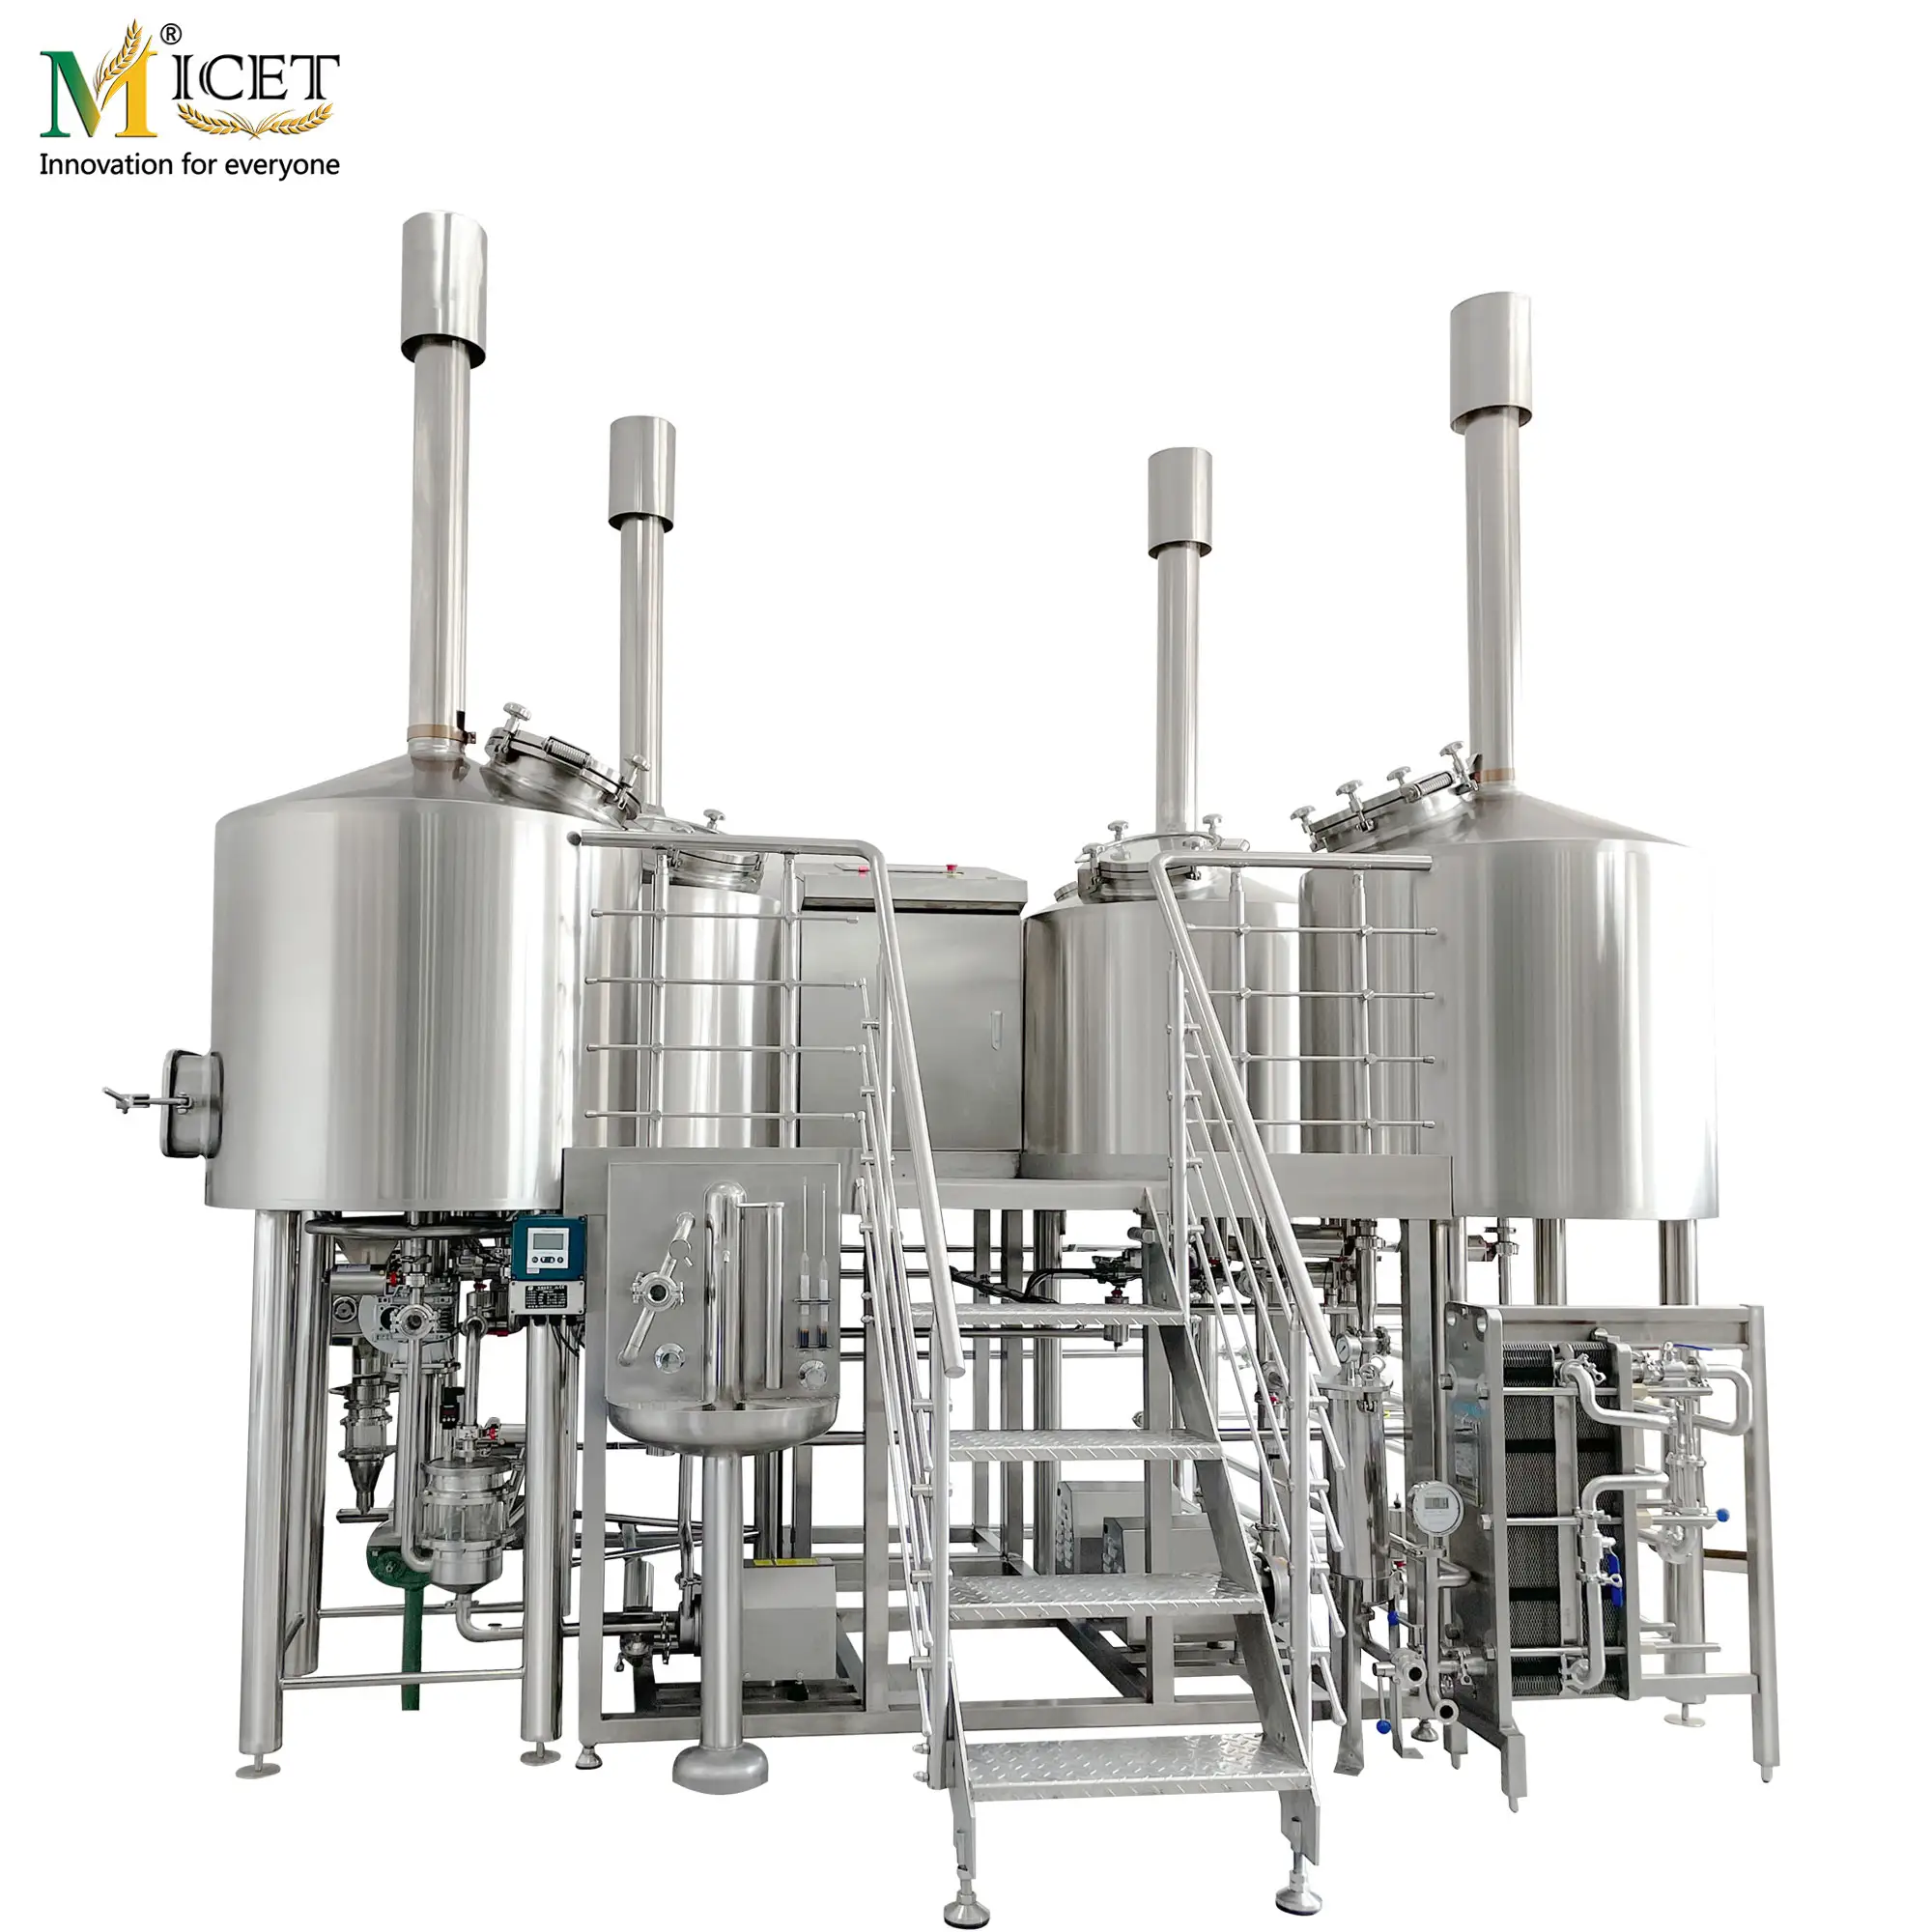 300L stainless steel mashing tank nano copper mini pub brewery equipment beer brewing equipment brewhouse equipment